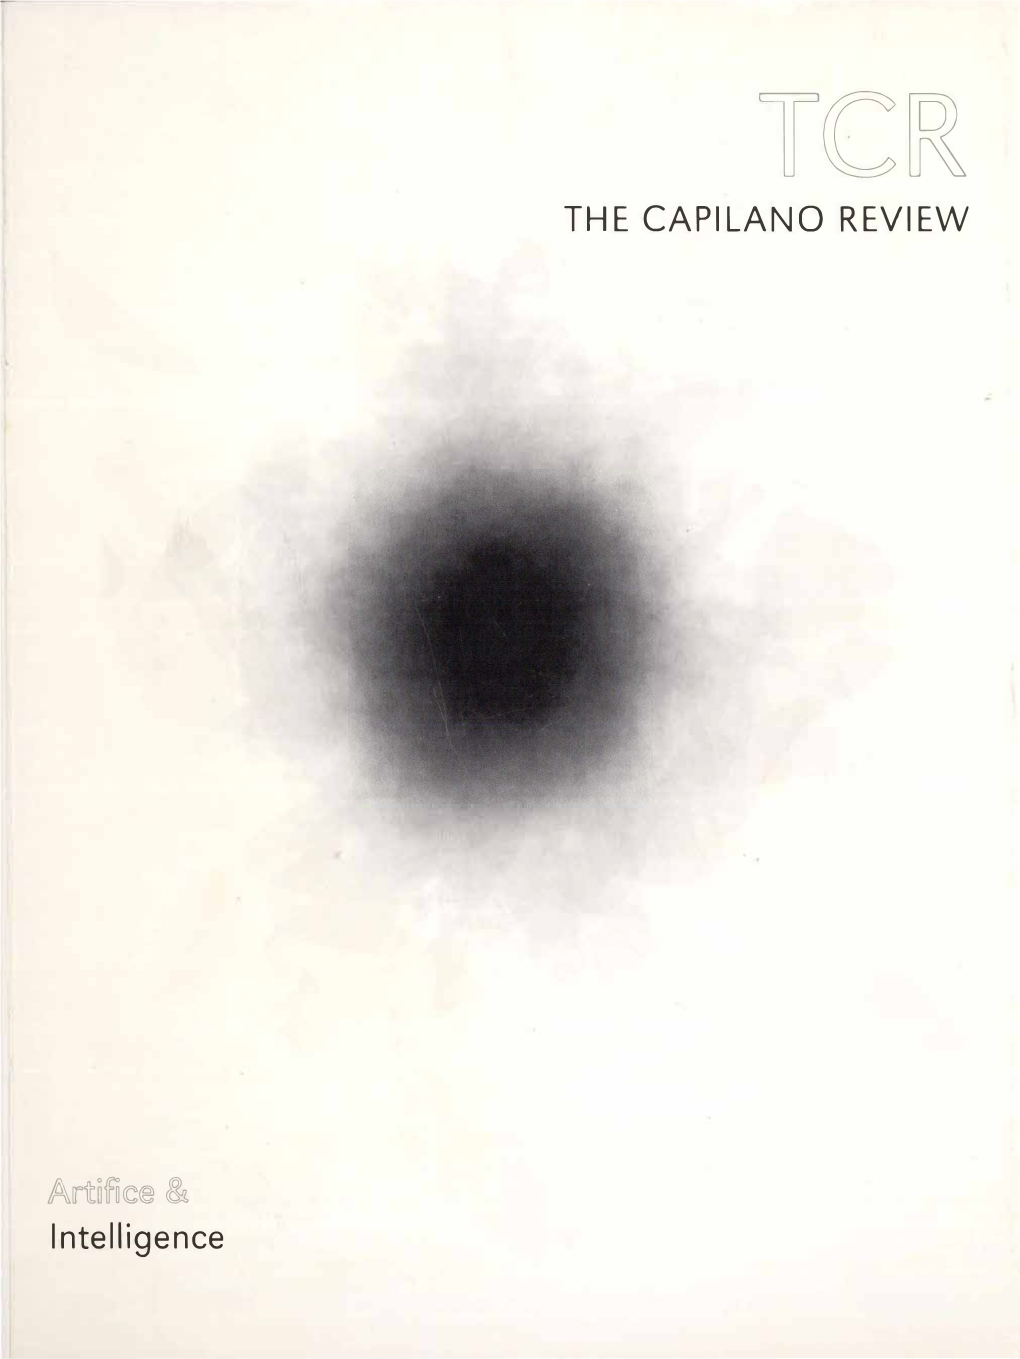 Intelligence the CAPILANO REVIEW